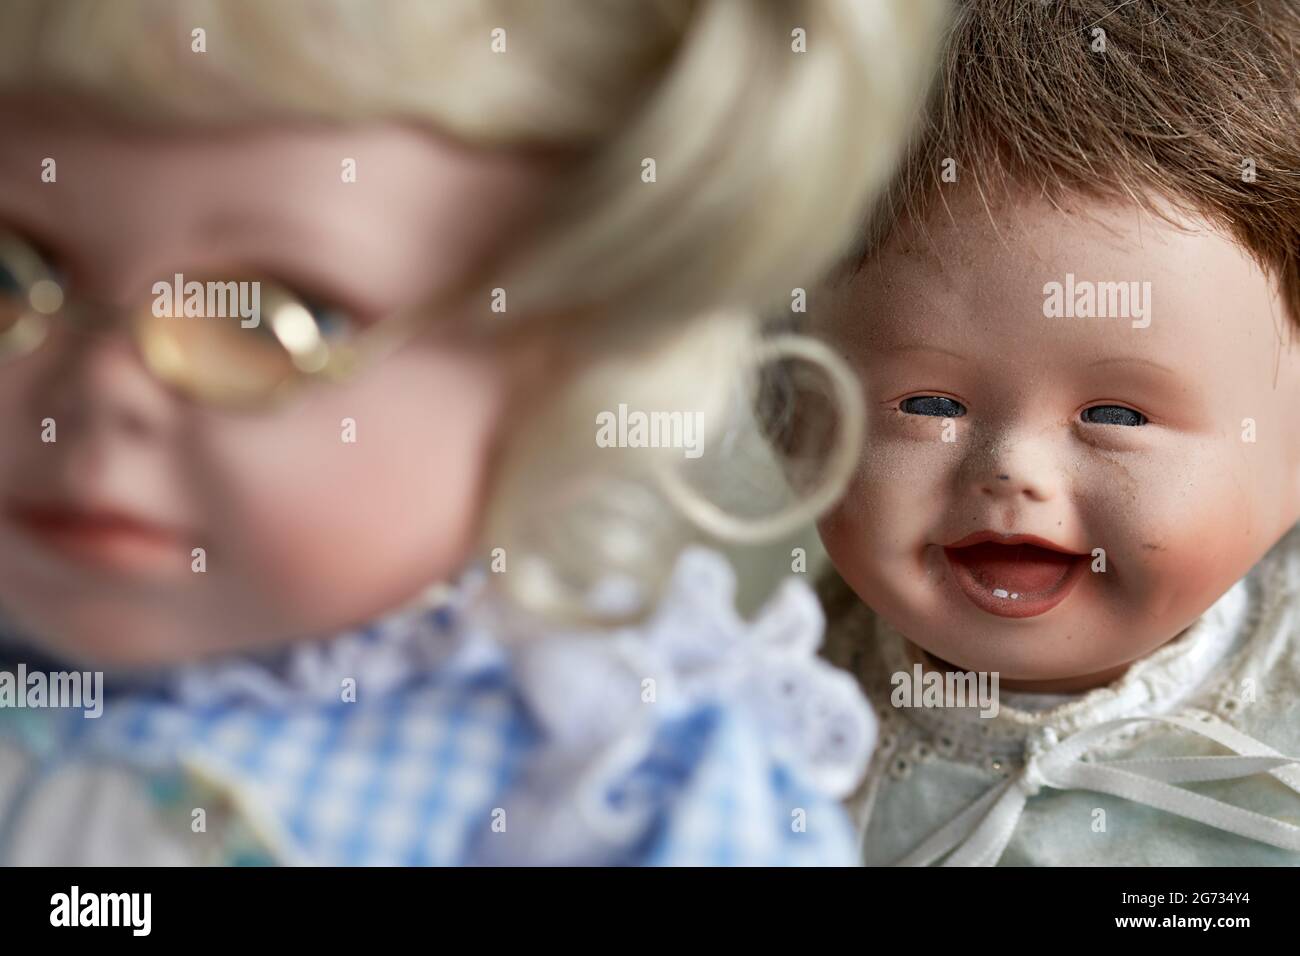 Vintage baby doll laughing at girl doll with glasses Stock Photo